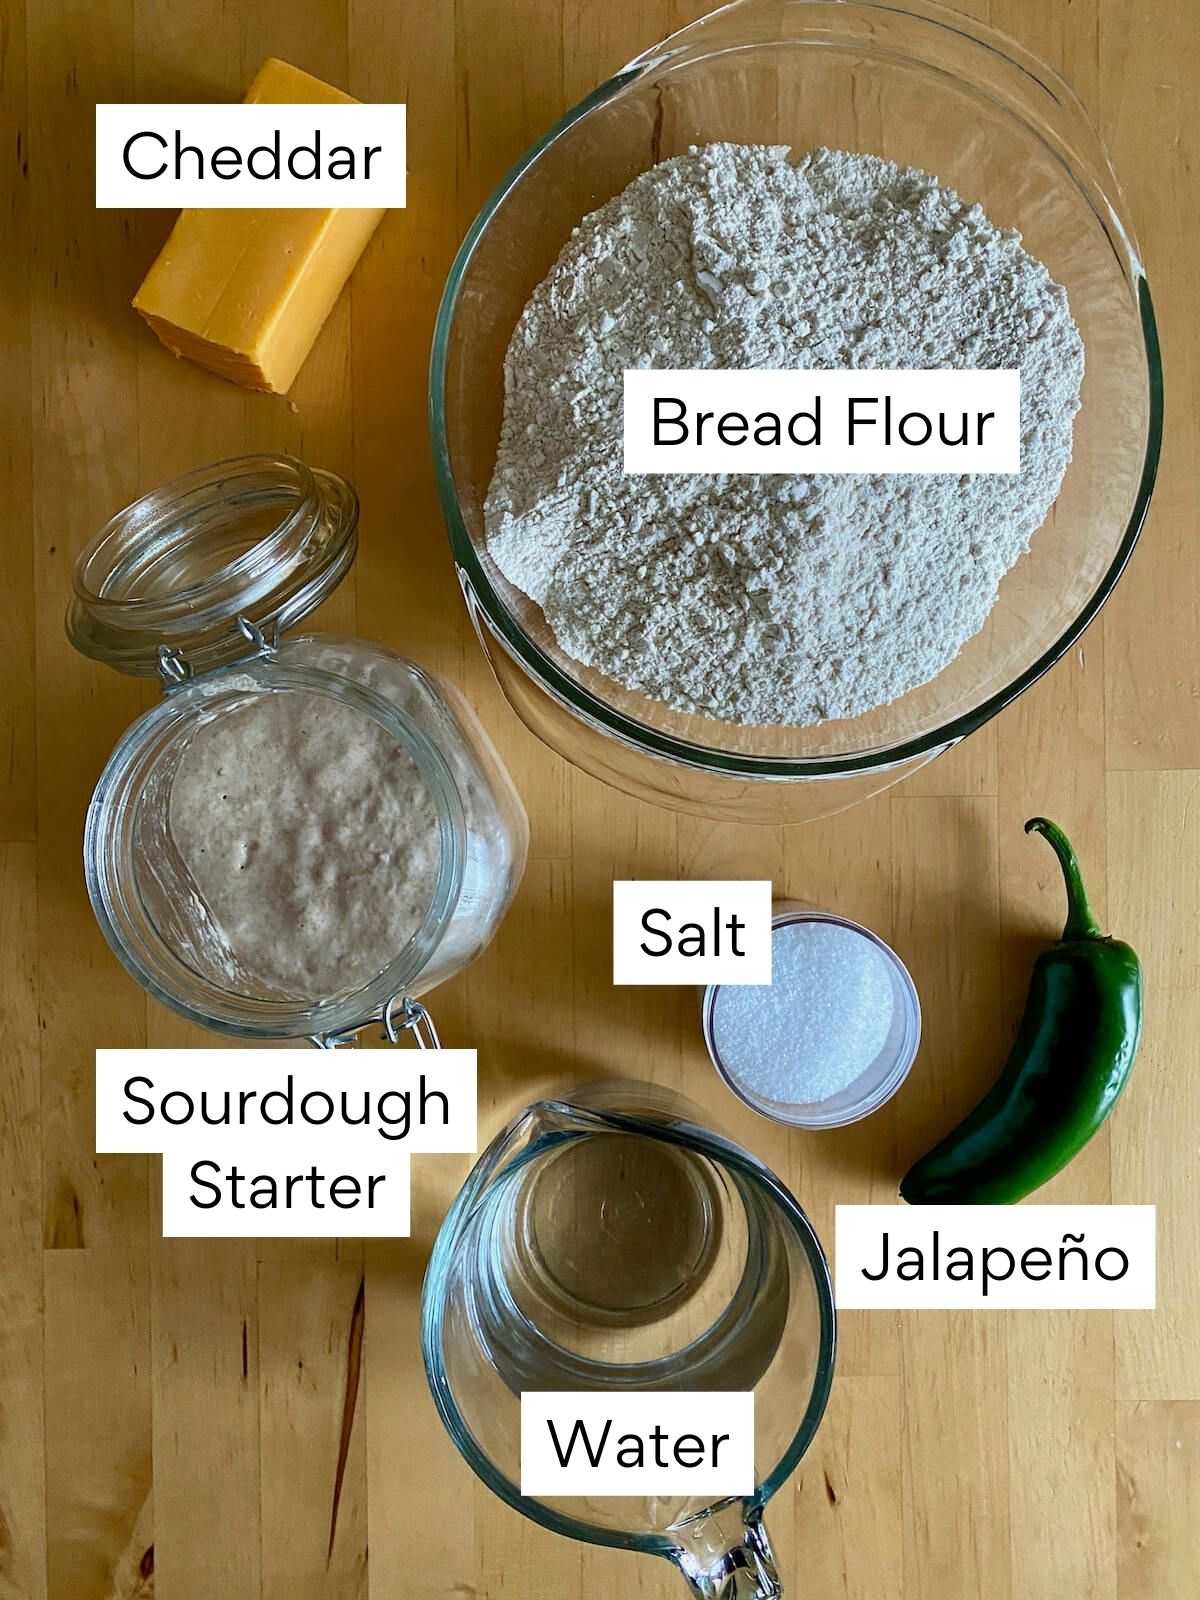 The ingredients to make jalapeño cheddar sourdough bread. Each ingredient is labeled with text. They include cheddar, bread flour, sourdough starter, salt, jalapeño, and water.